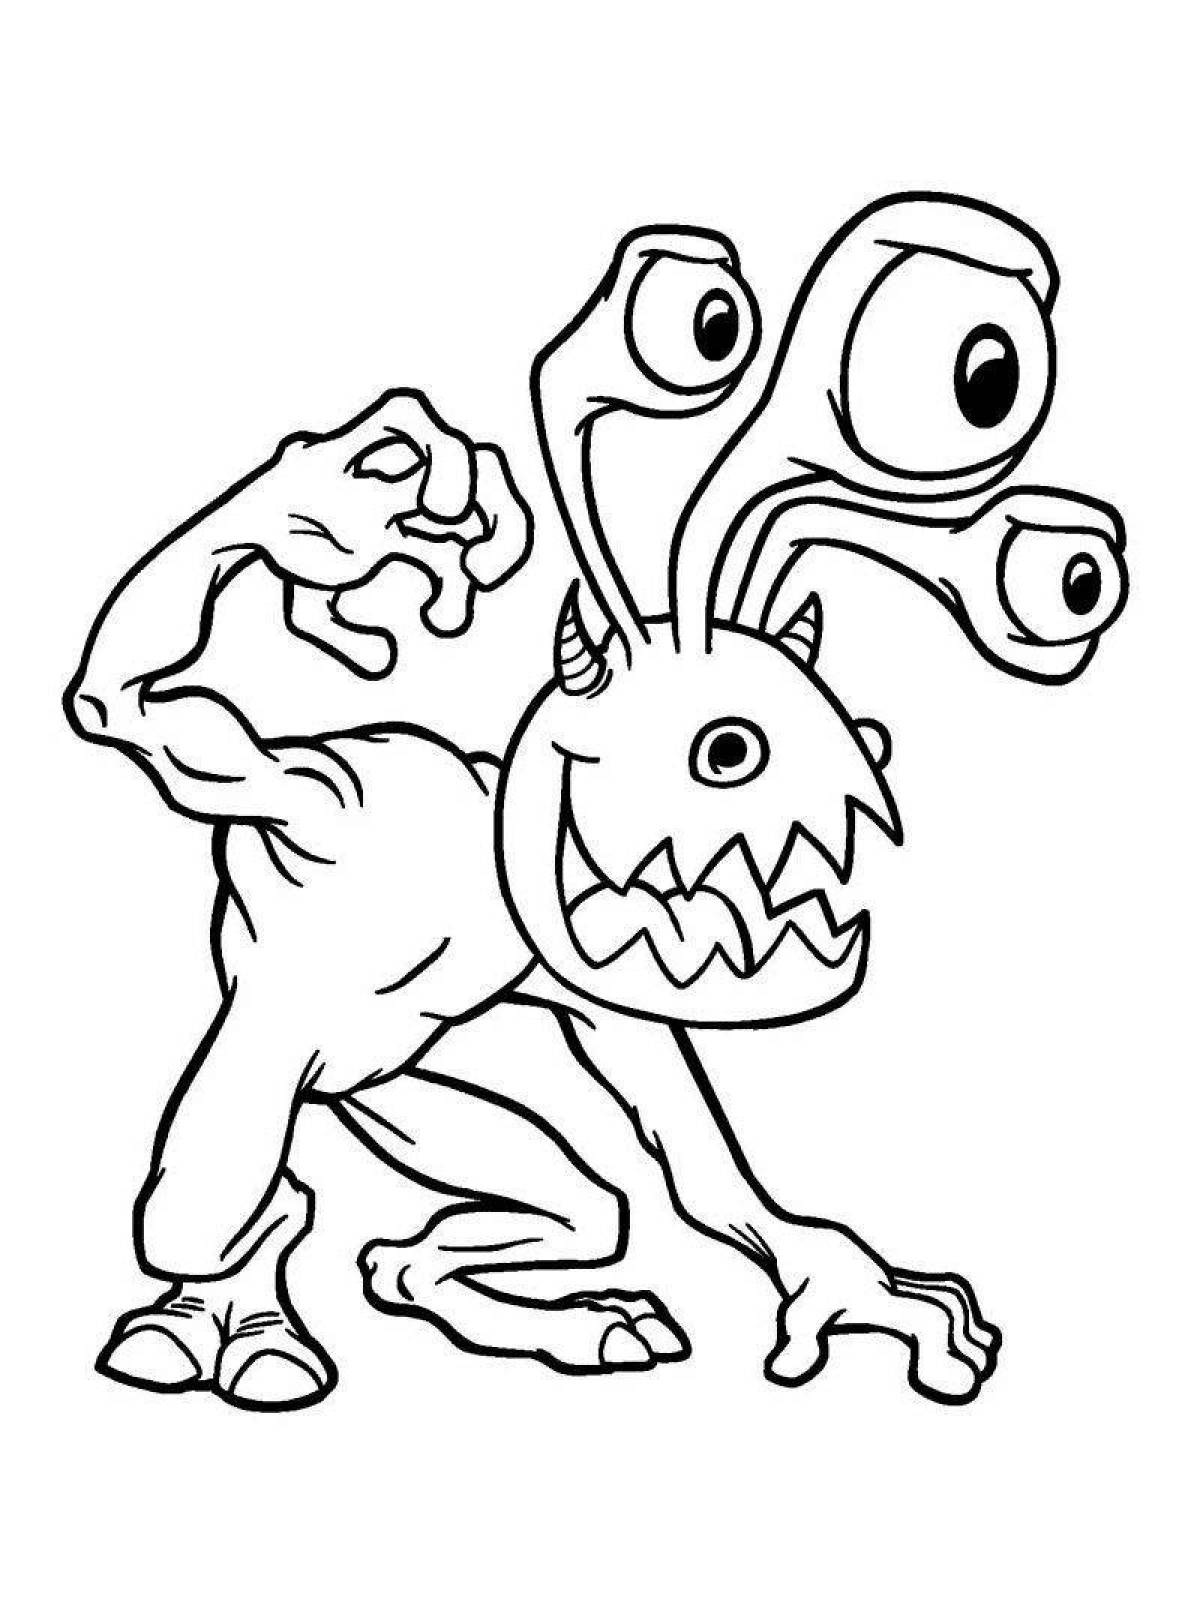 Zany maxi monsters coloring page